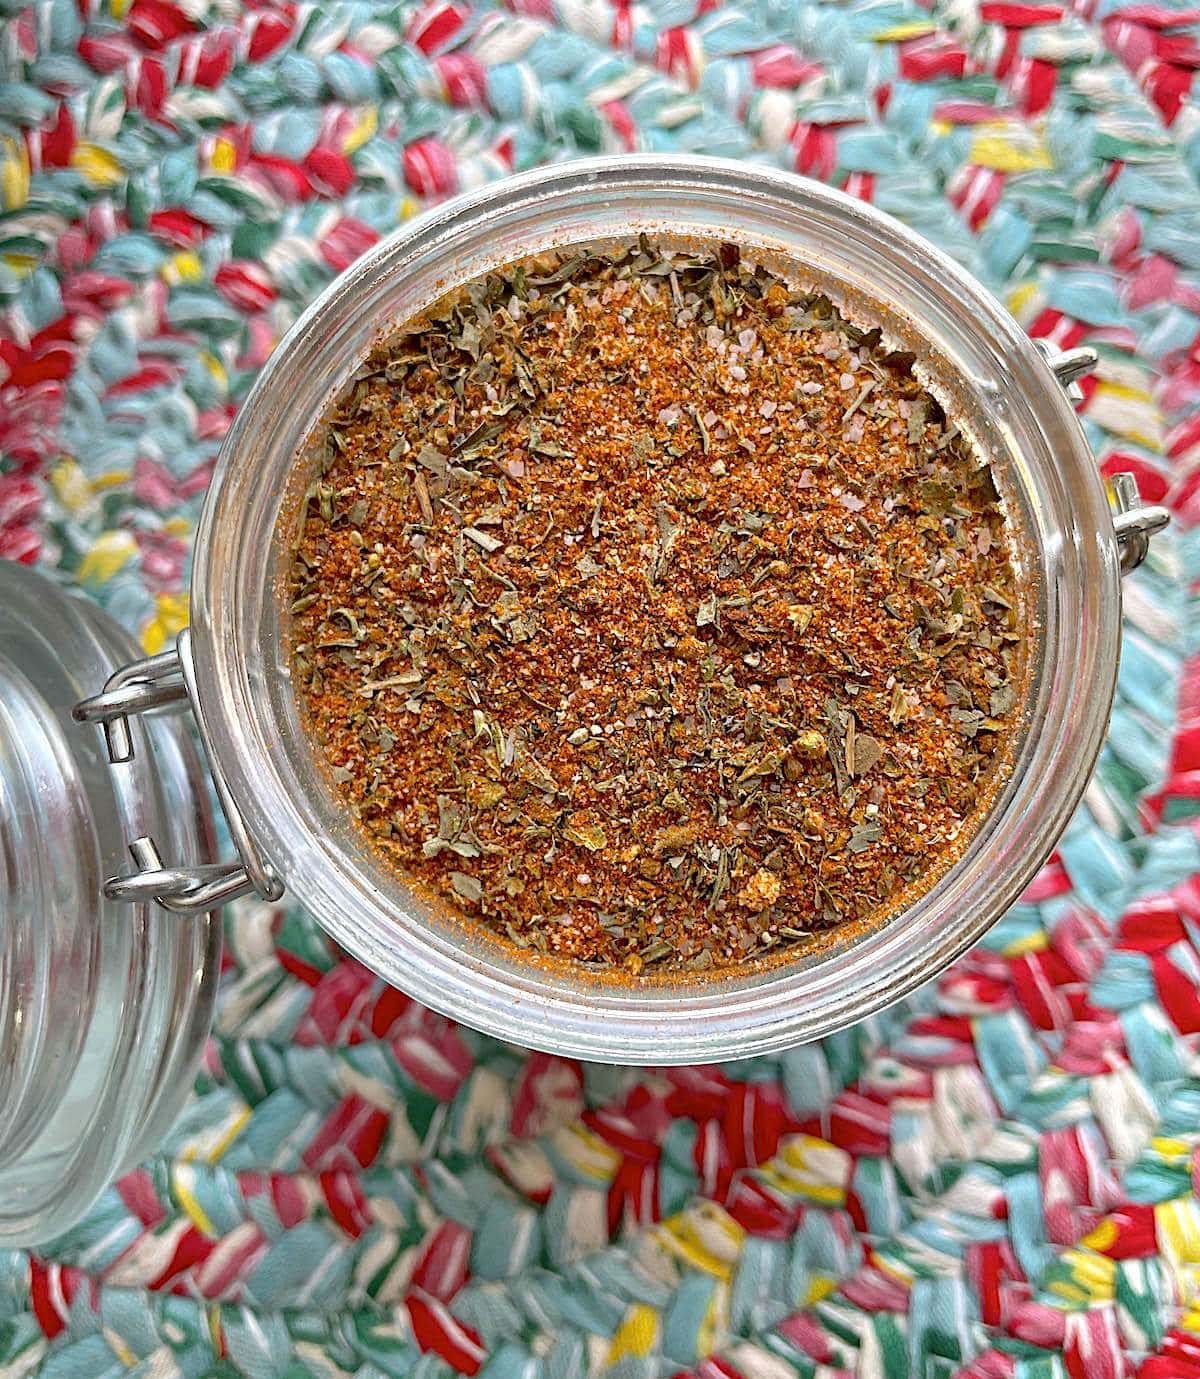 A jar of homemade creole seasoning blend on a colorful mat.